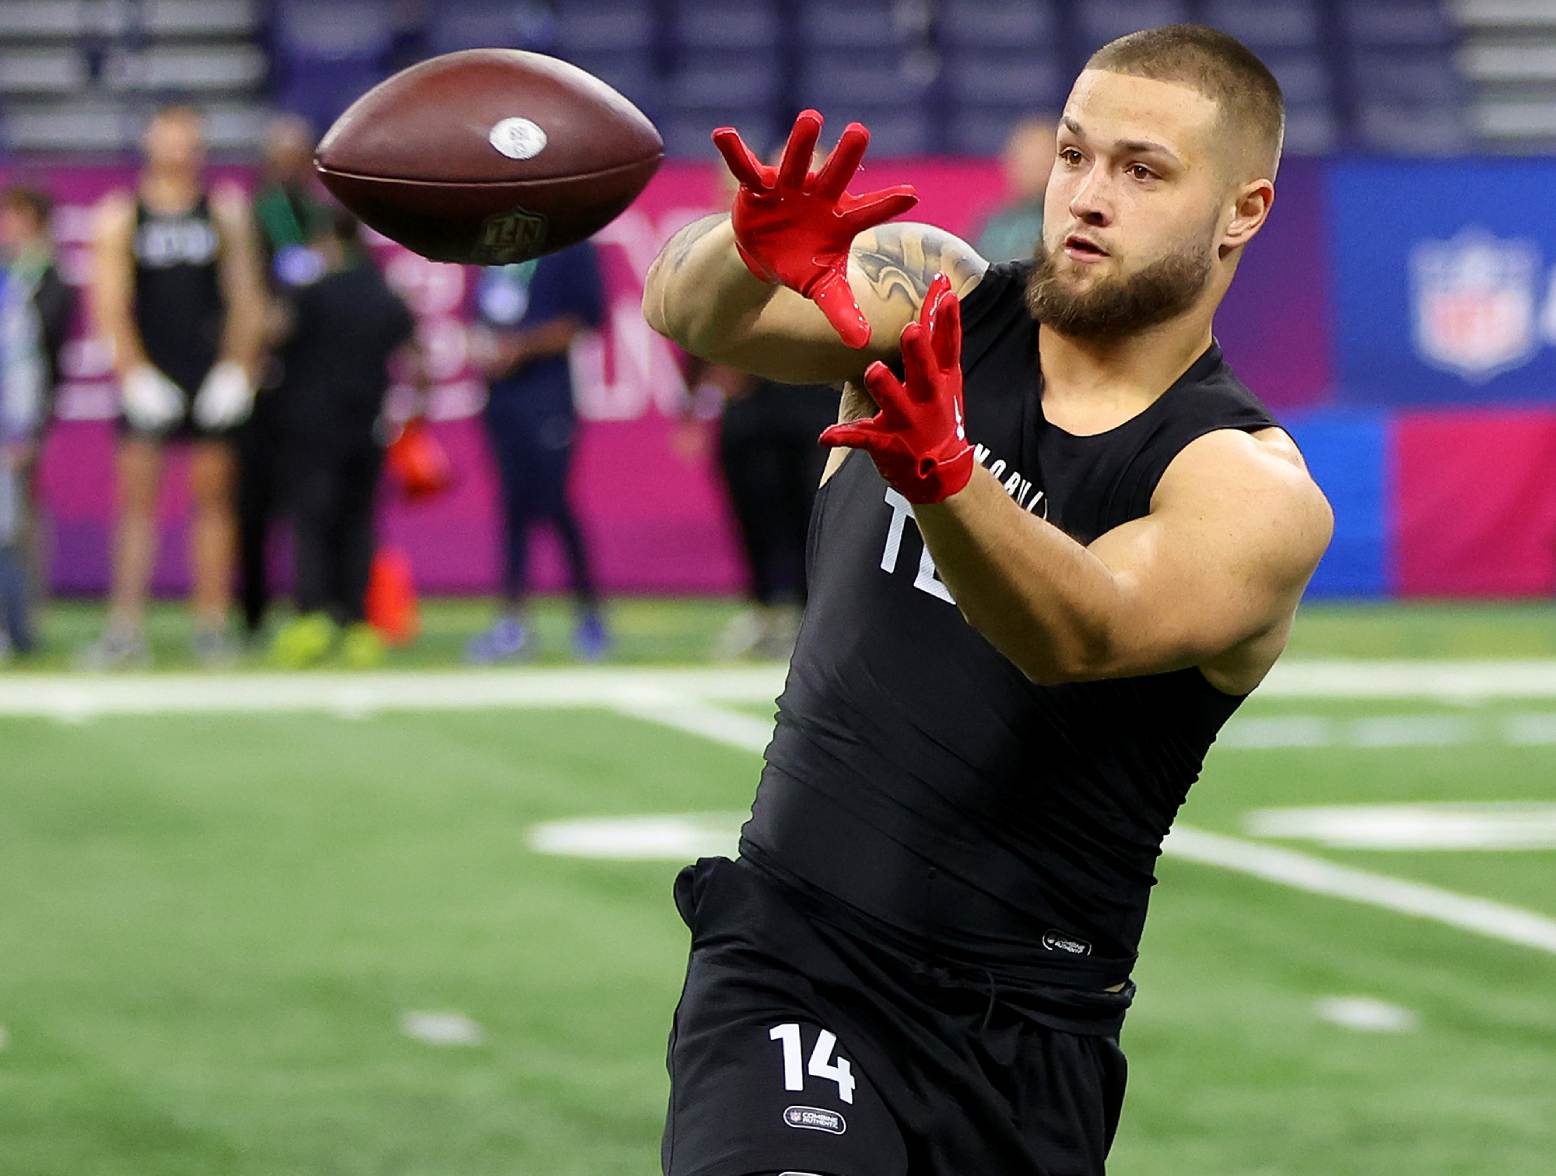 INDIANAPOLIS, INDIANA - MARCH 01: Cade Stover #TE14 of Ohio State participates in a drill during the NFL Combine at Lucas Oil Stadium on March 01, 2024 in Indianapolis, Indiana. (Photo by Stacy Revere/Getty Images)